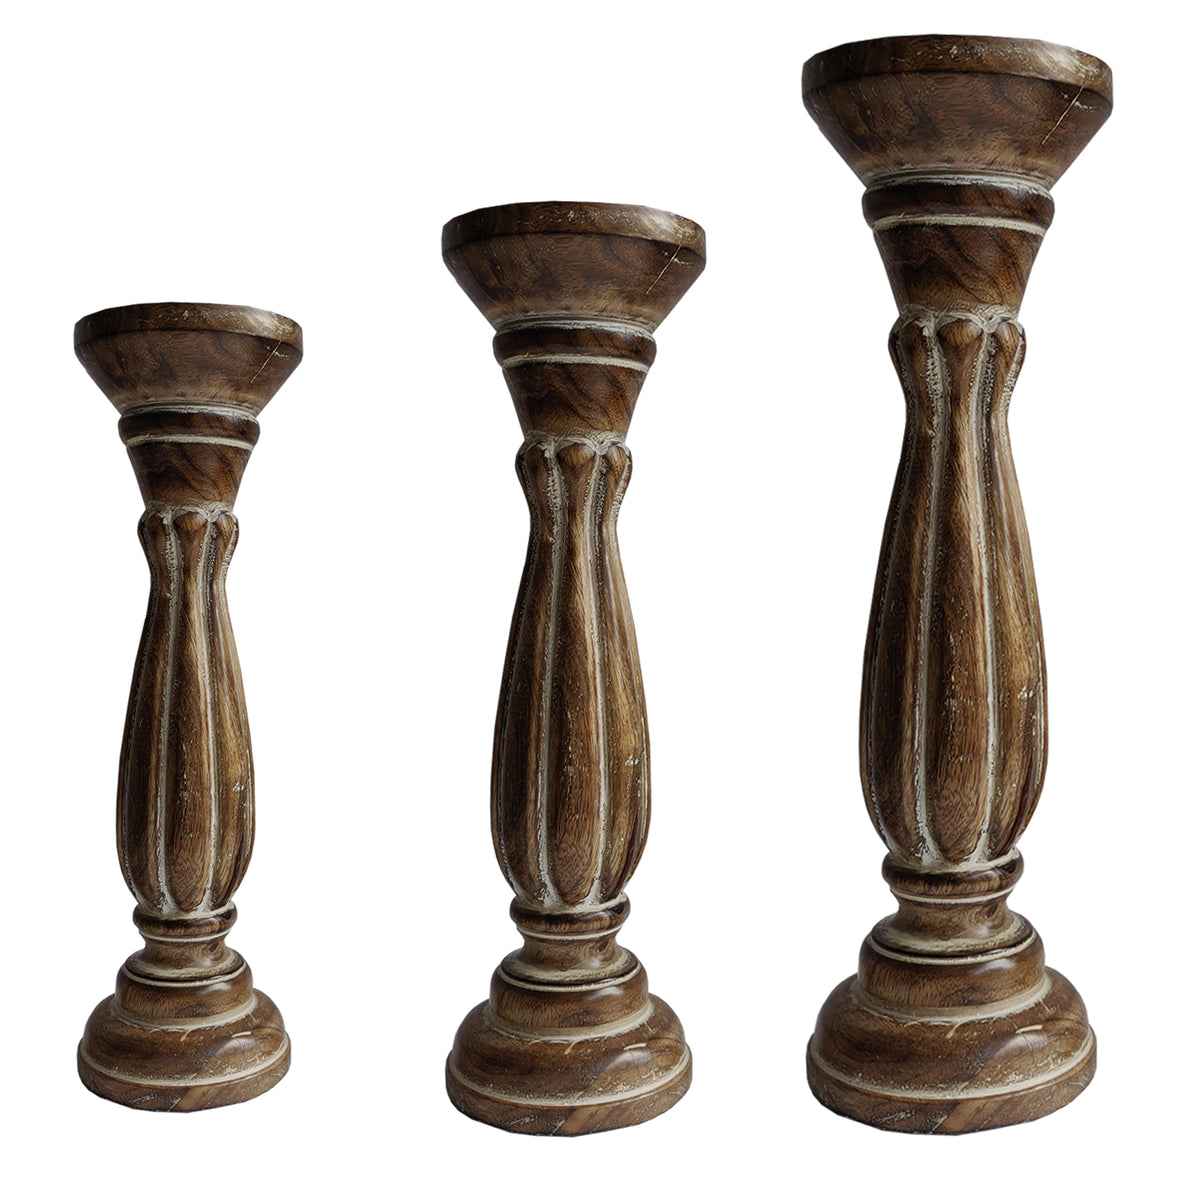 Handmade Wooden Candle Holder with Pillar Base Support (Set of 3) - Distressed Brown